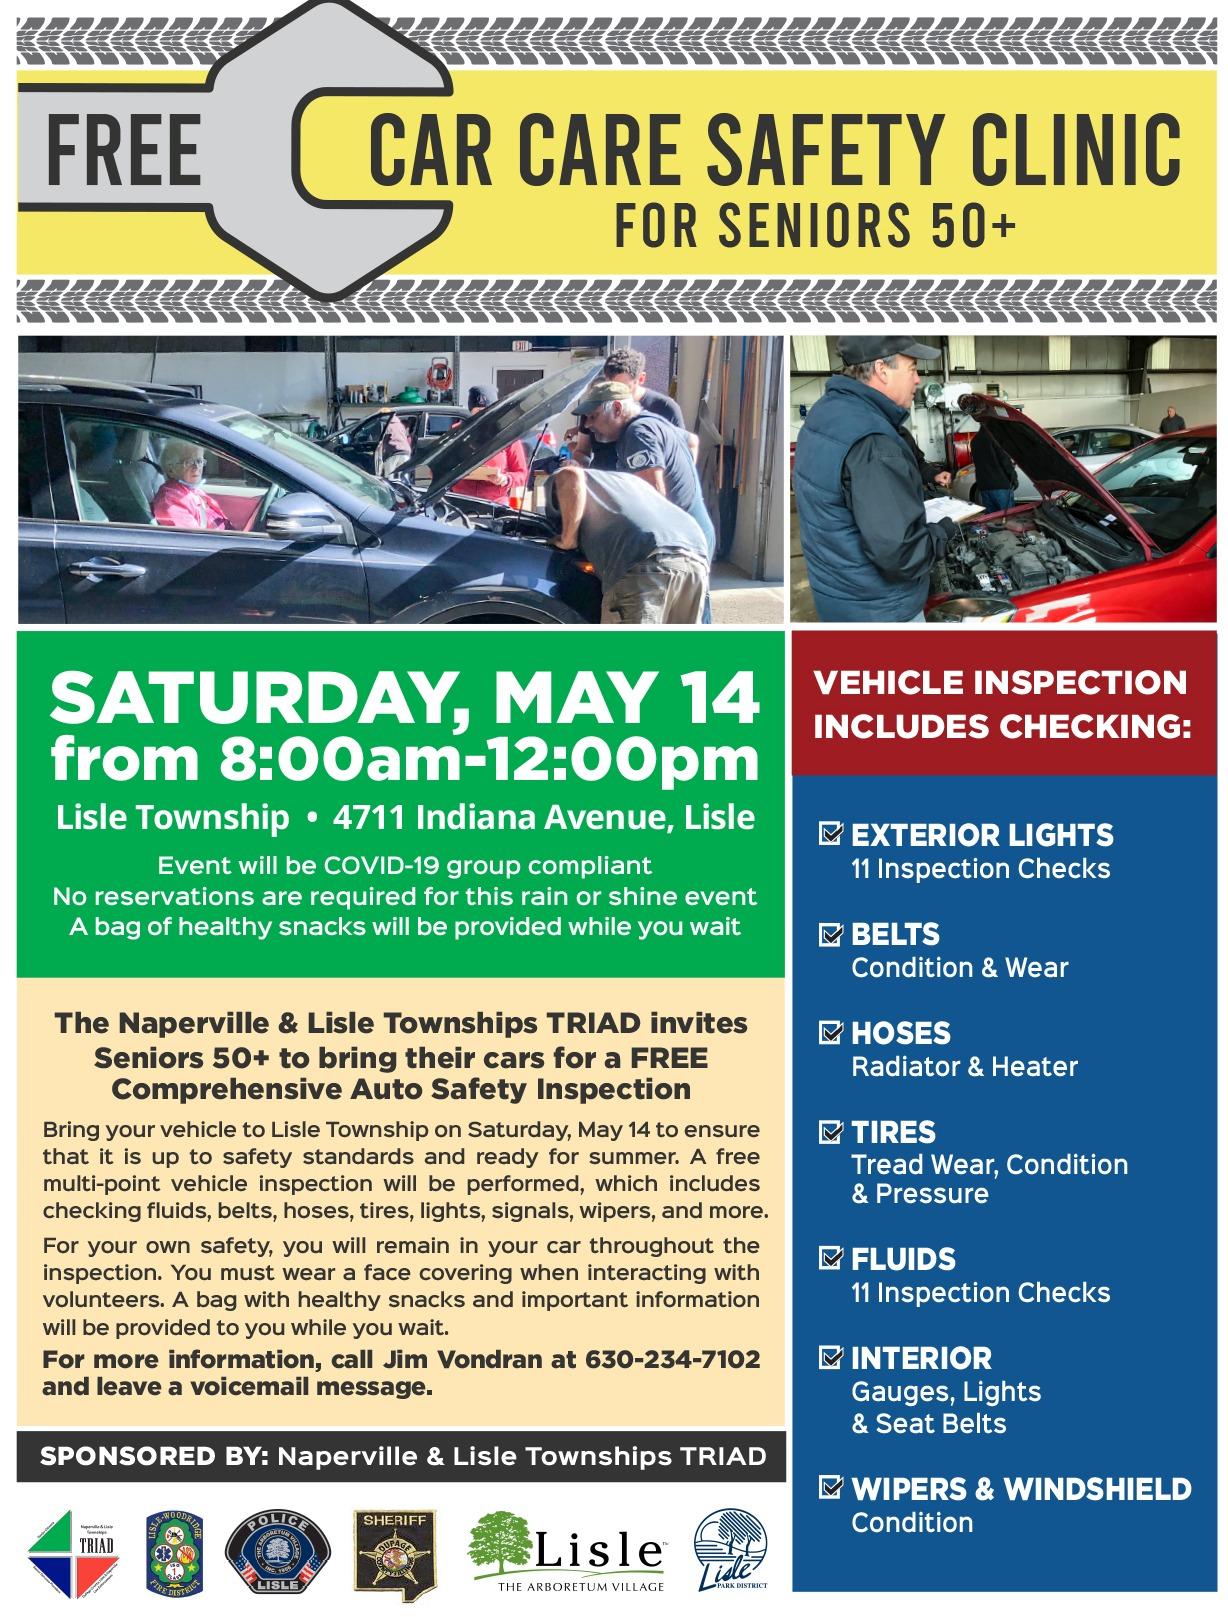 Naperville Lisle TRIAD Car Care Safety Clinic 50+